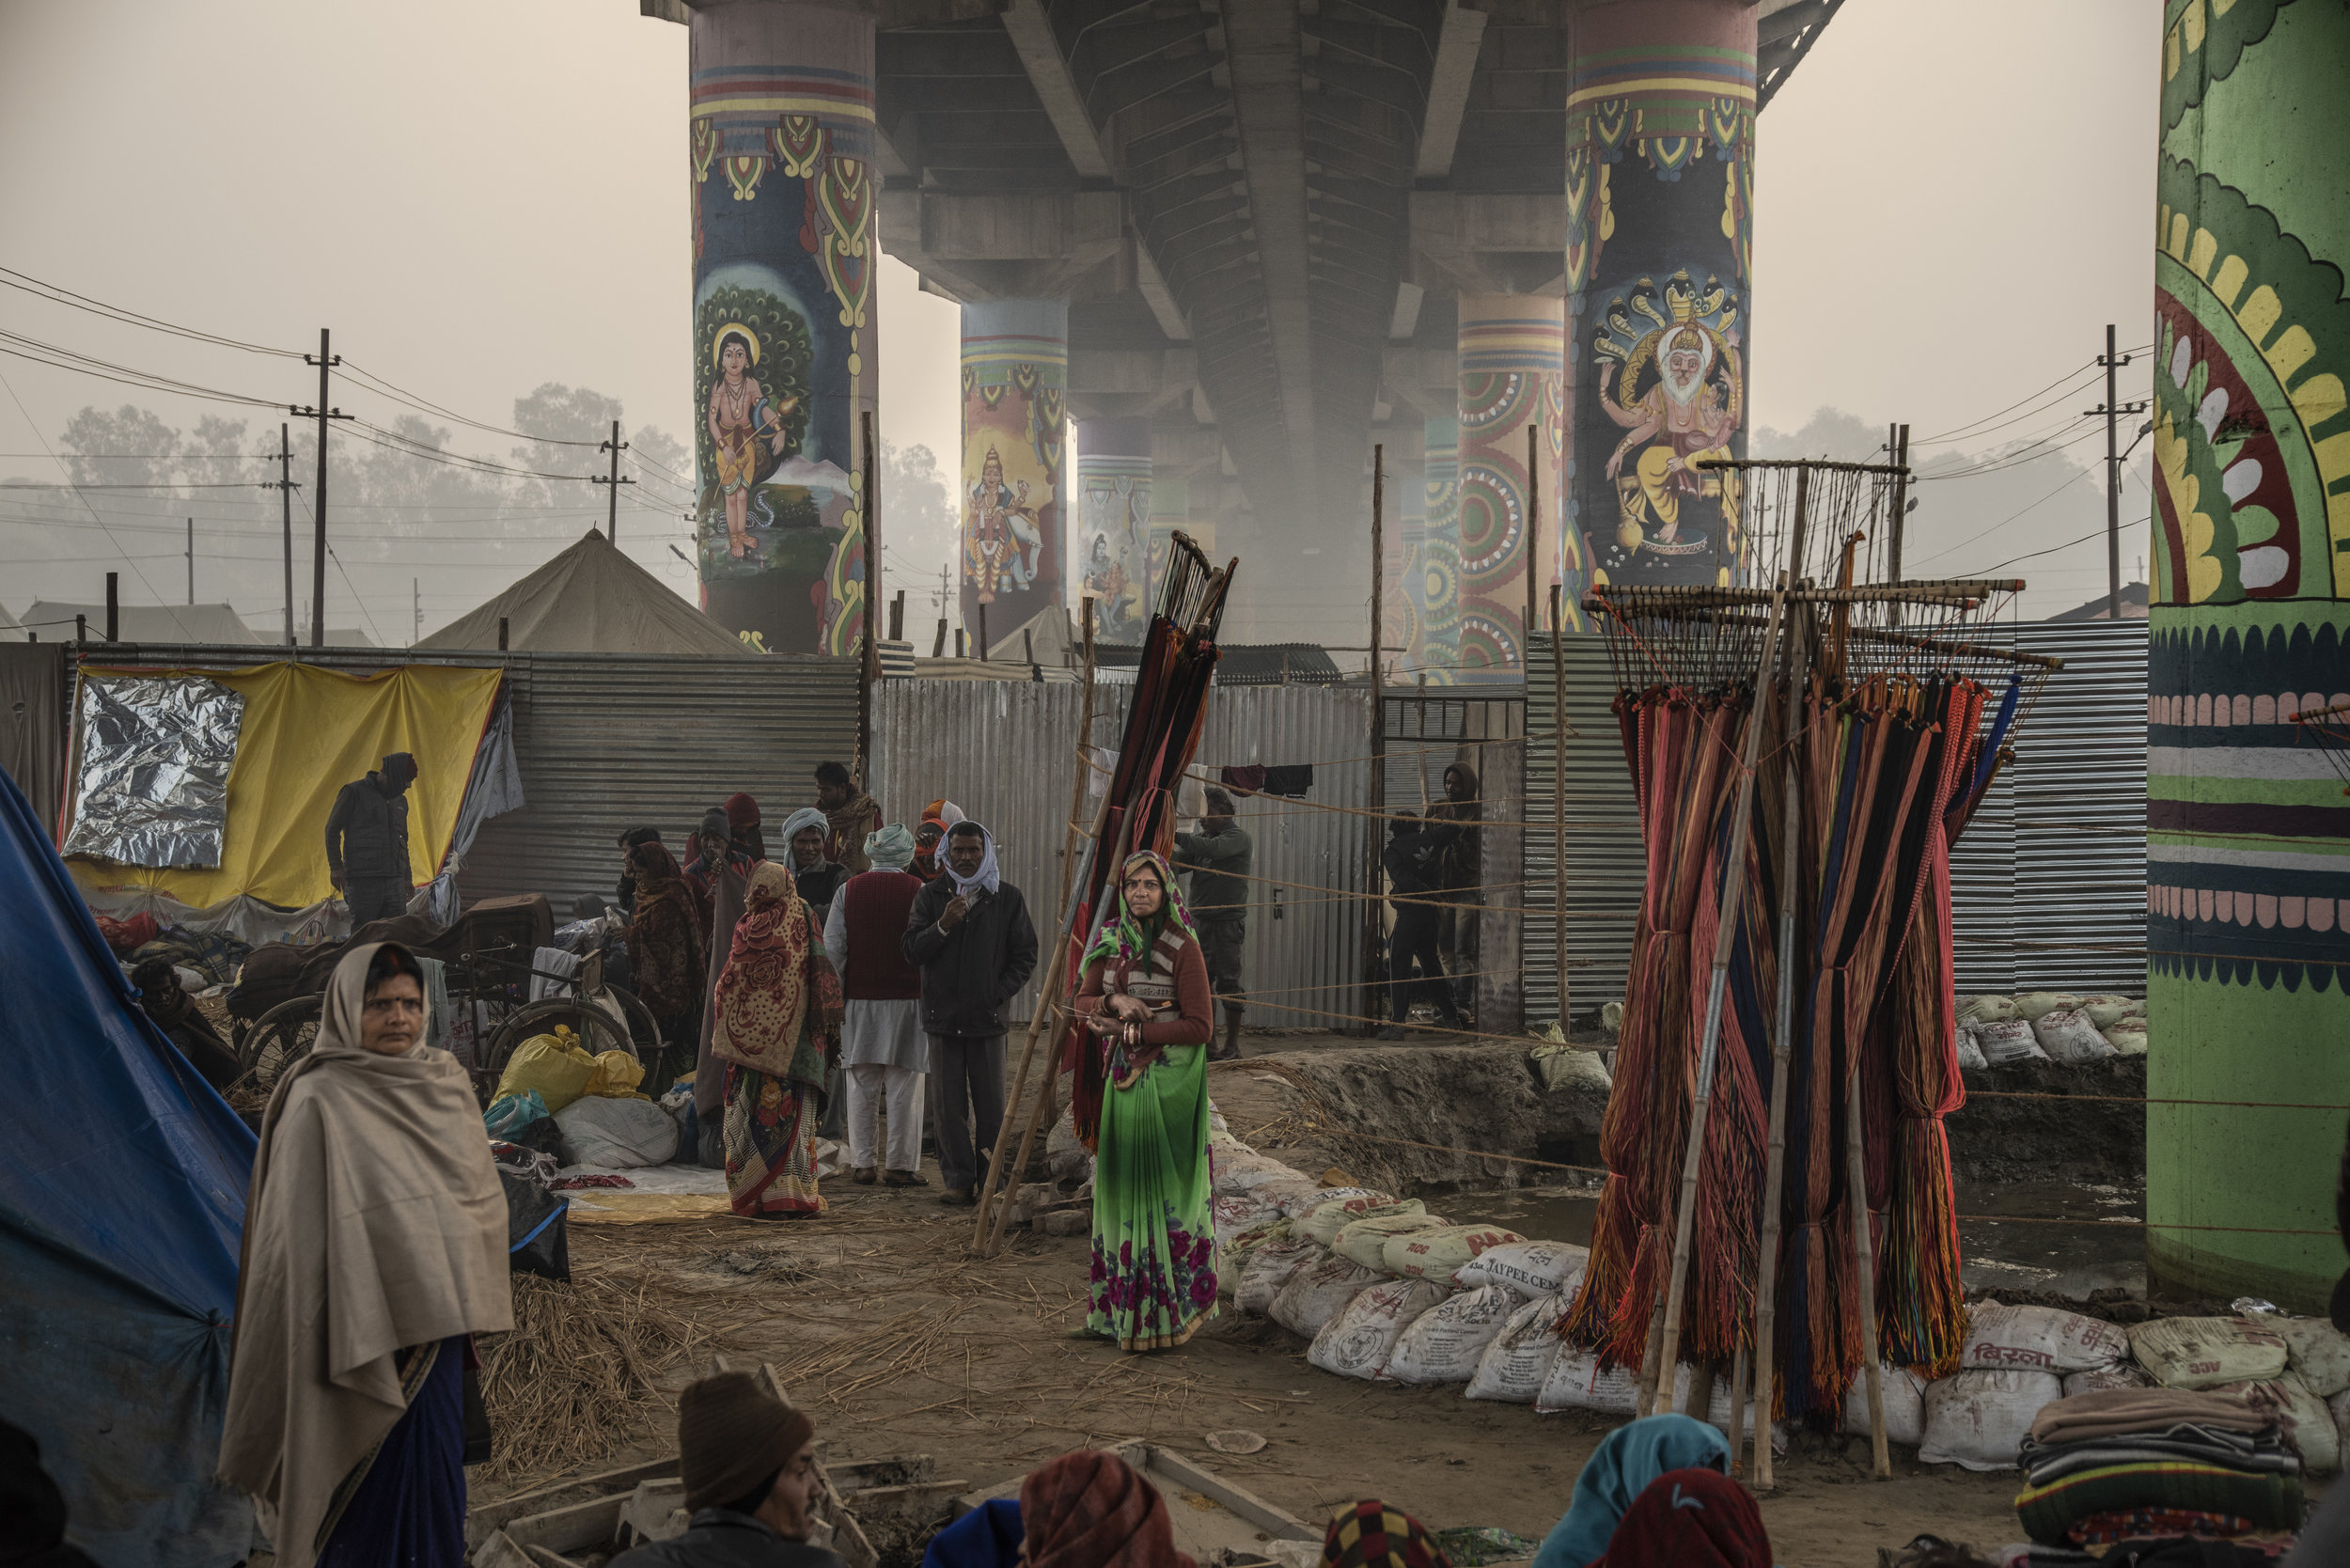  People gather beneath a painted cement bridge within the Mela. 